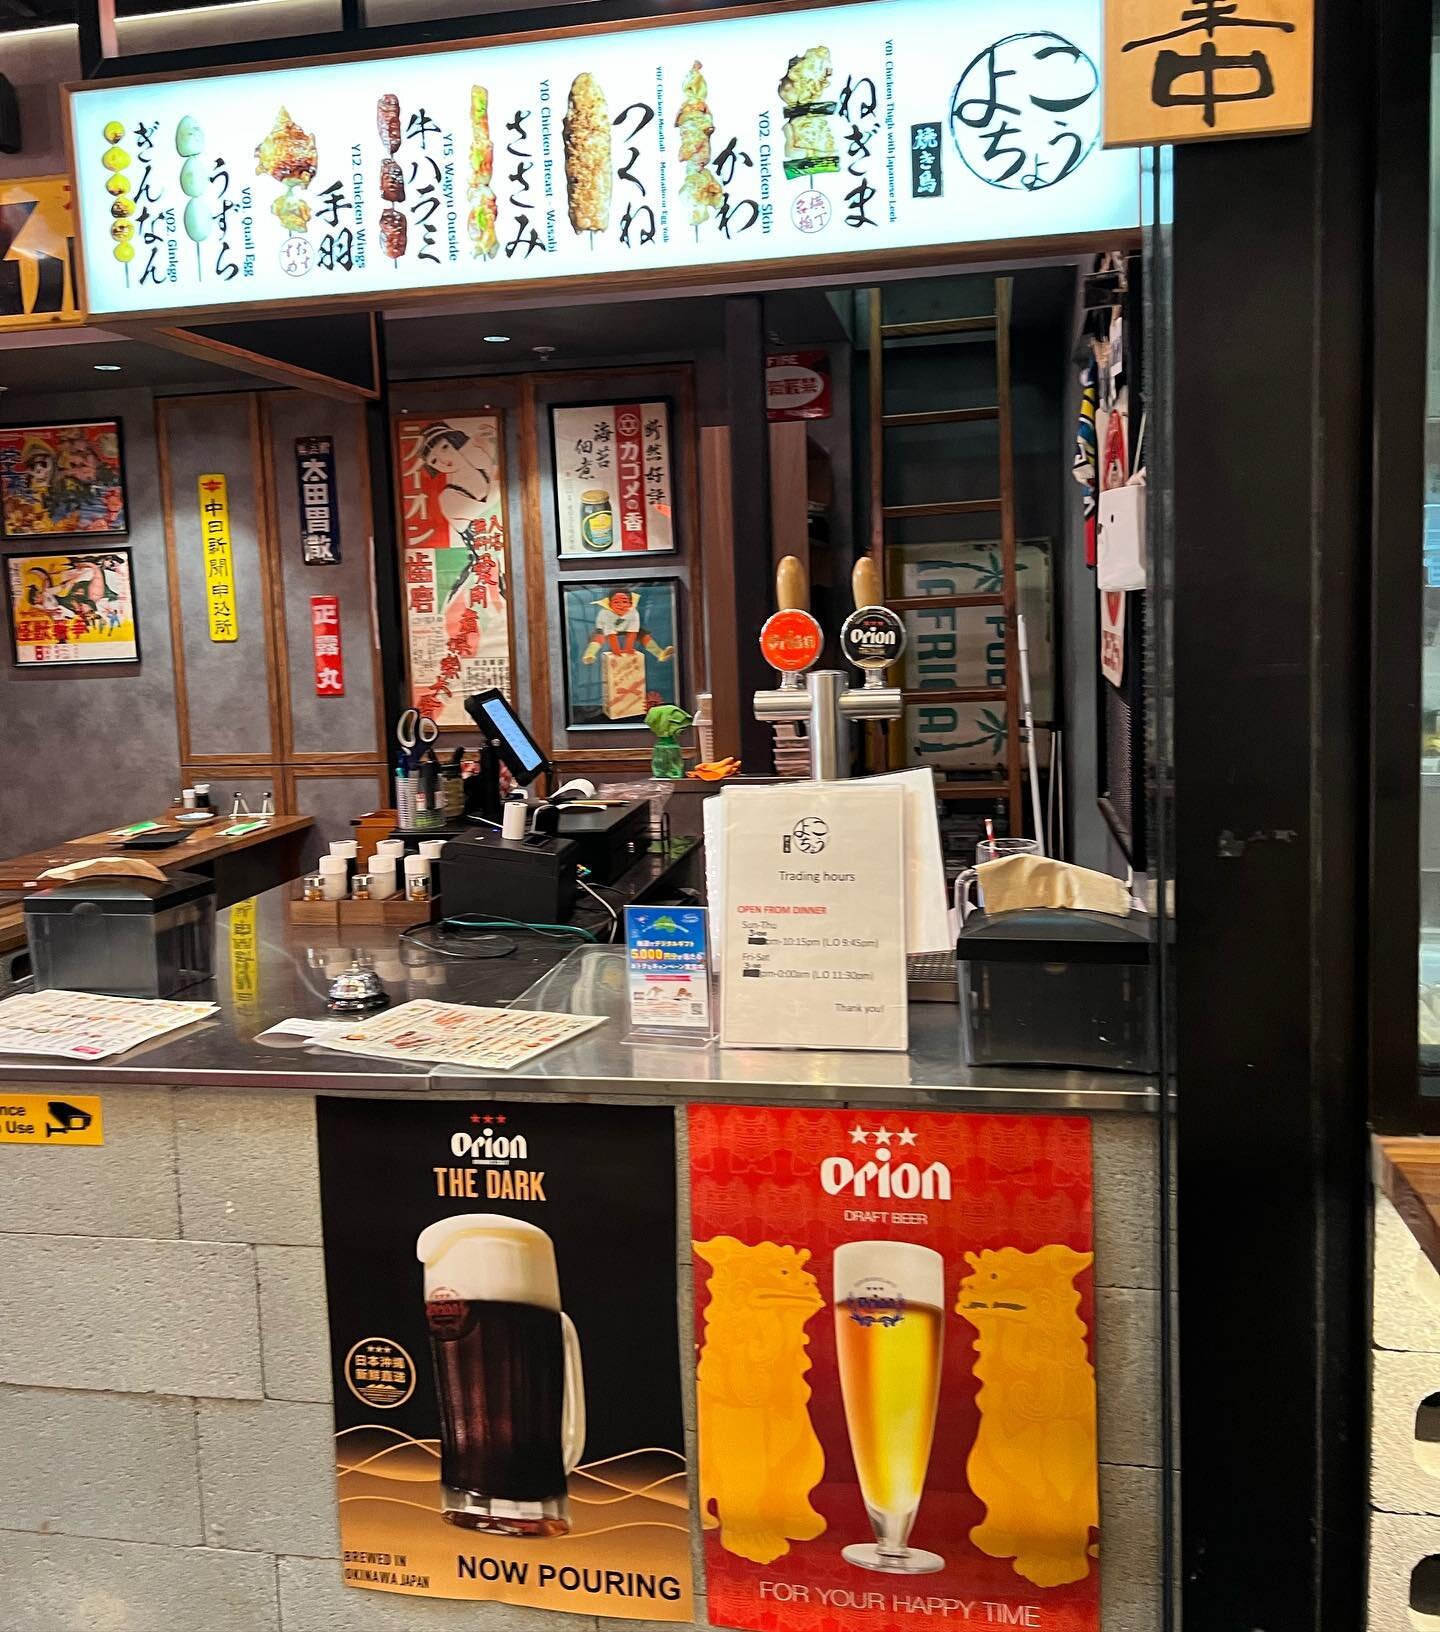 Try an ice cold Orion Draft and the dark @yakitoriyokocho 
Both beers are now on tap🍻
#aebeerimports #aandebeerimports #asianbeer #orionbeer #orionthedark #darkbeer #japanesebeer #draftbeer #draftbeersystem #tapbeer